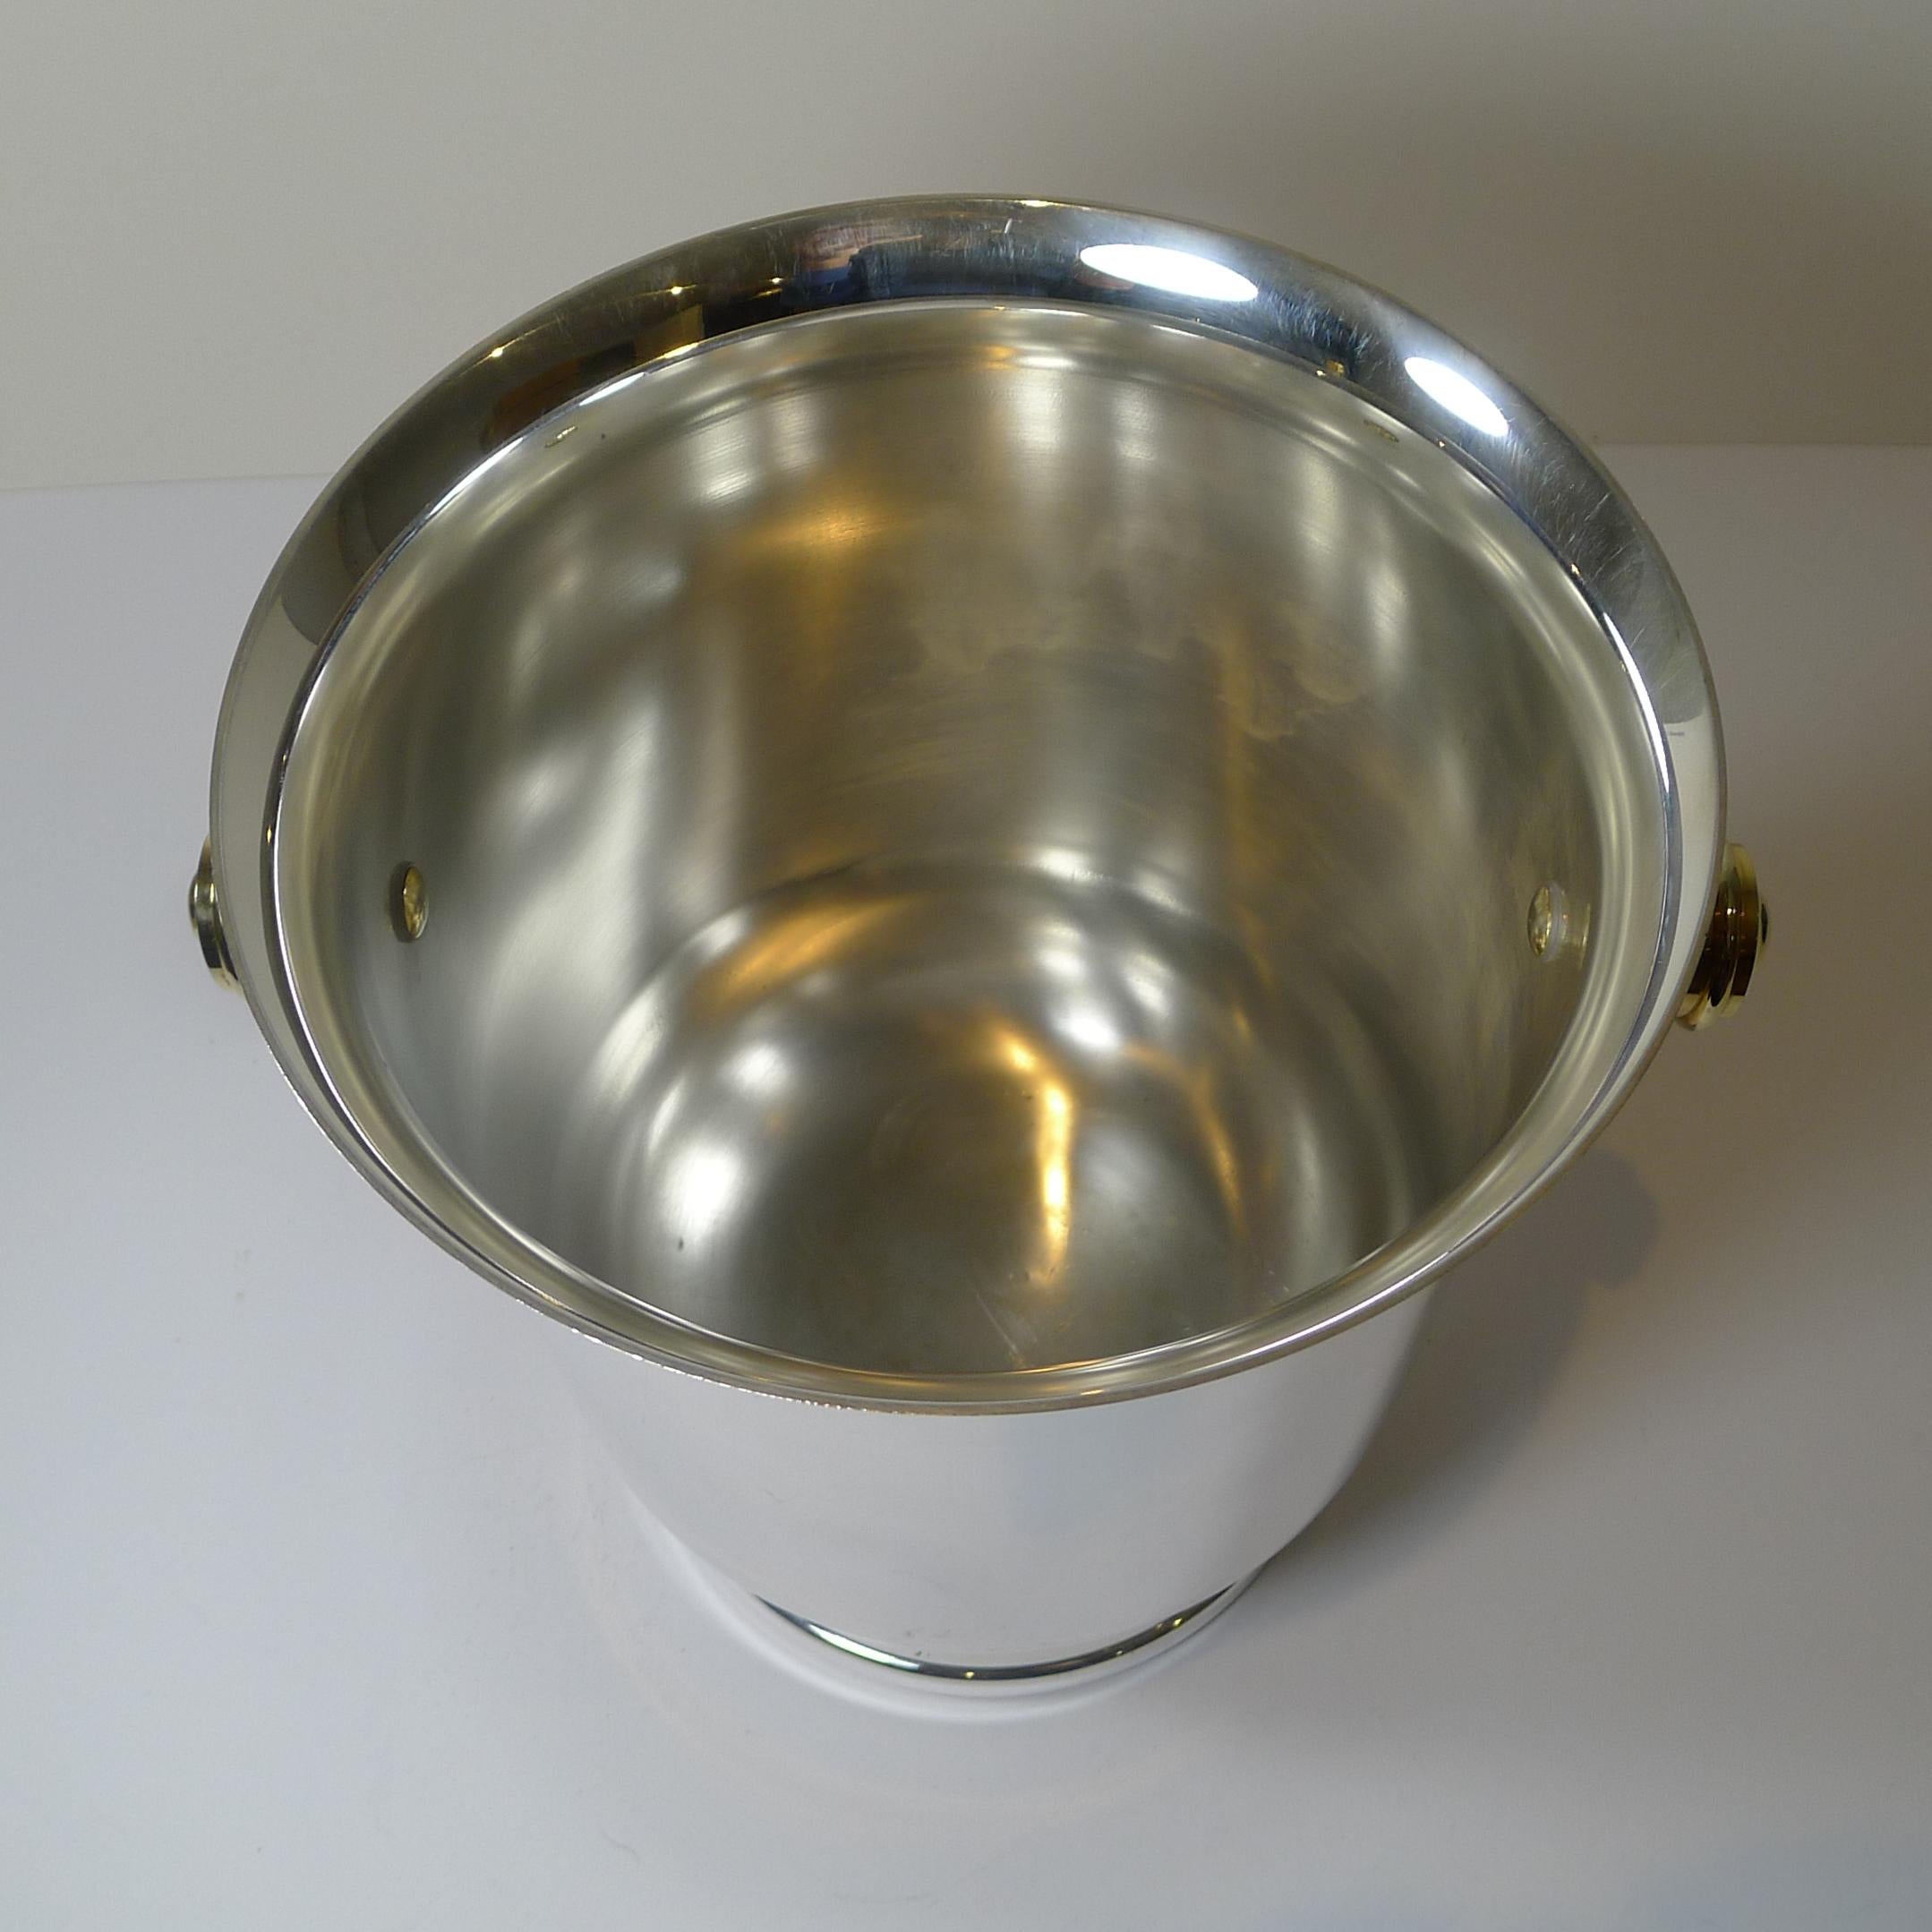 A fabulous and very on-trend French Champagne bucket, silver plate with modernist gold plated handles dating to the 1980's.

Just back from our silversmith's workshop where it has been professionally cleaned and polished, restoring it to it's